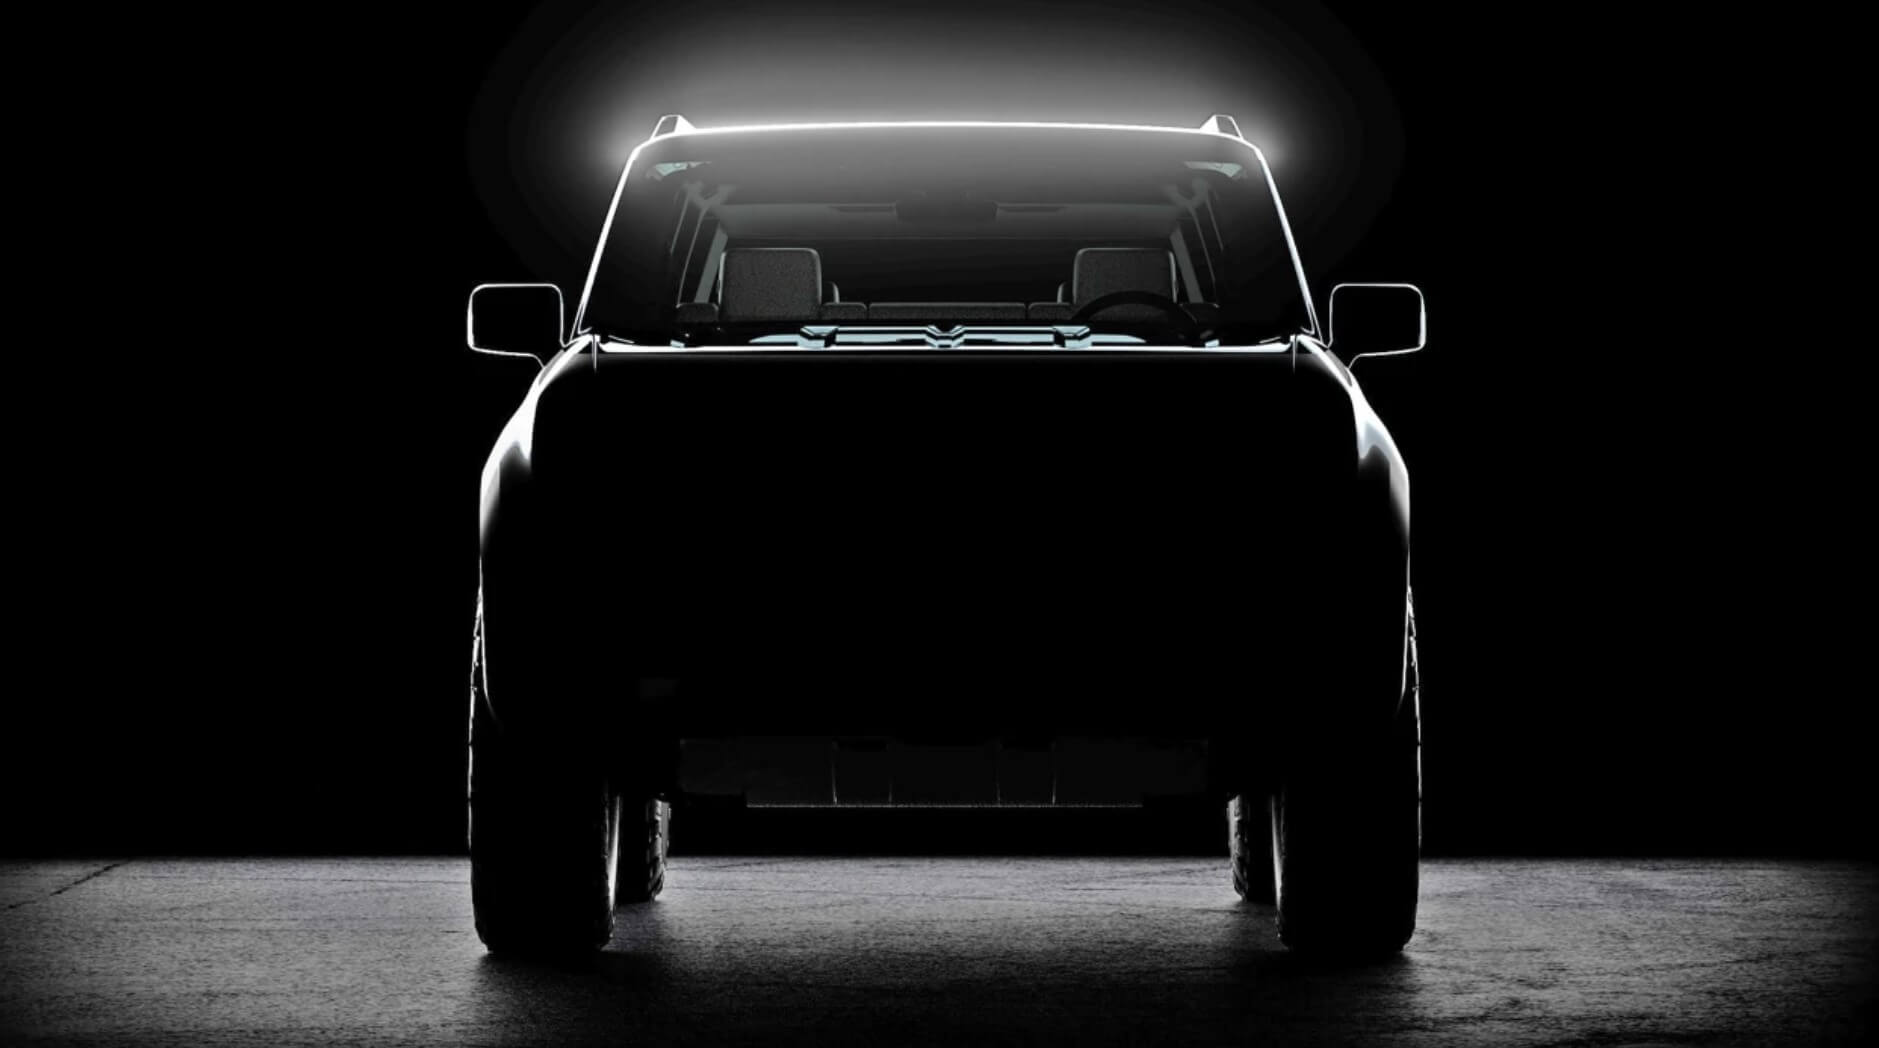 aria-label="VW scout SUV teaser"